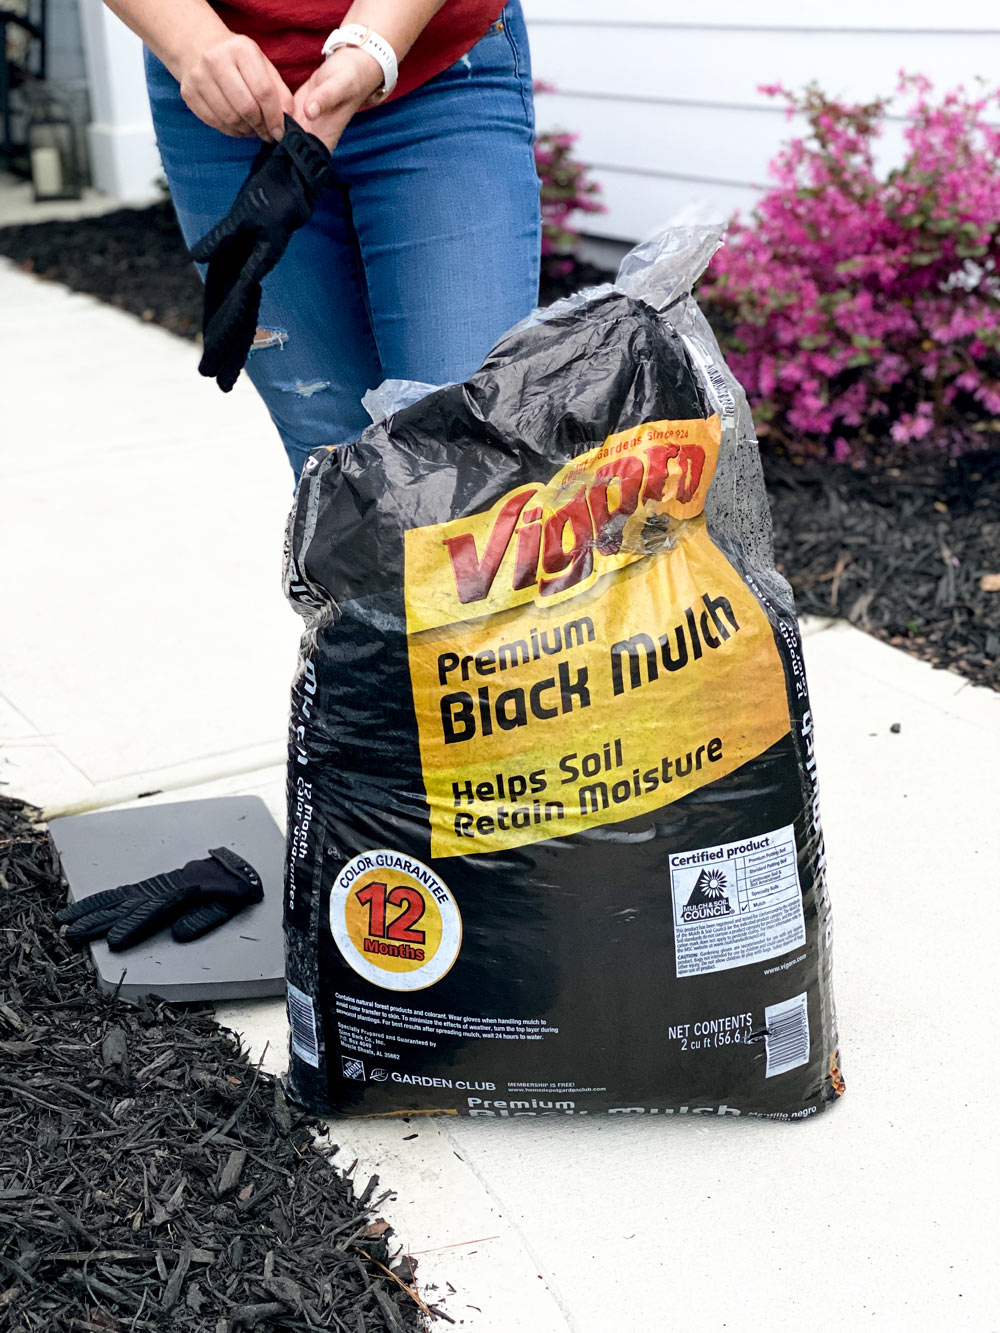 Person putting on gloves for Vigoro Black Mulch.